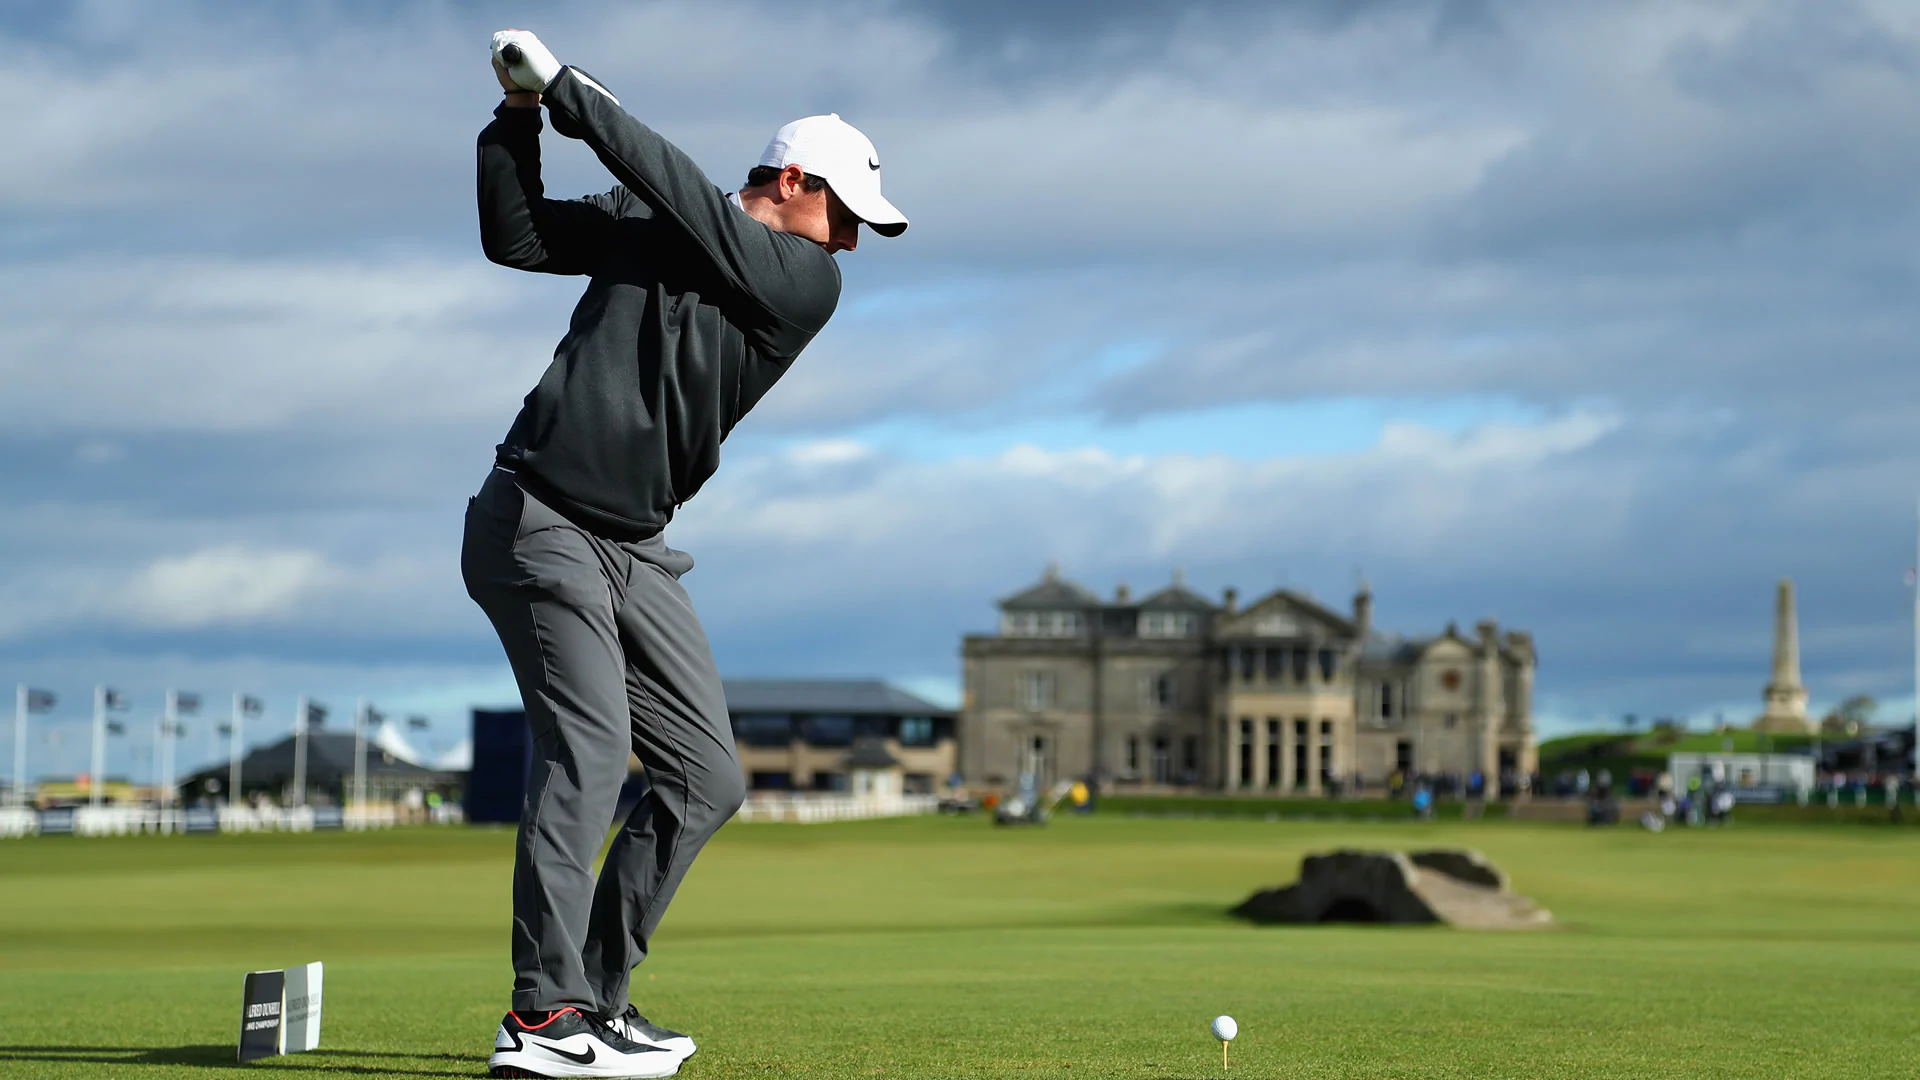 Watch: McIlroy drives 18th hole at St. Andrews 6